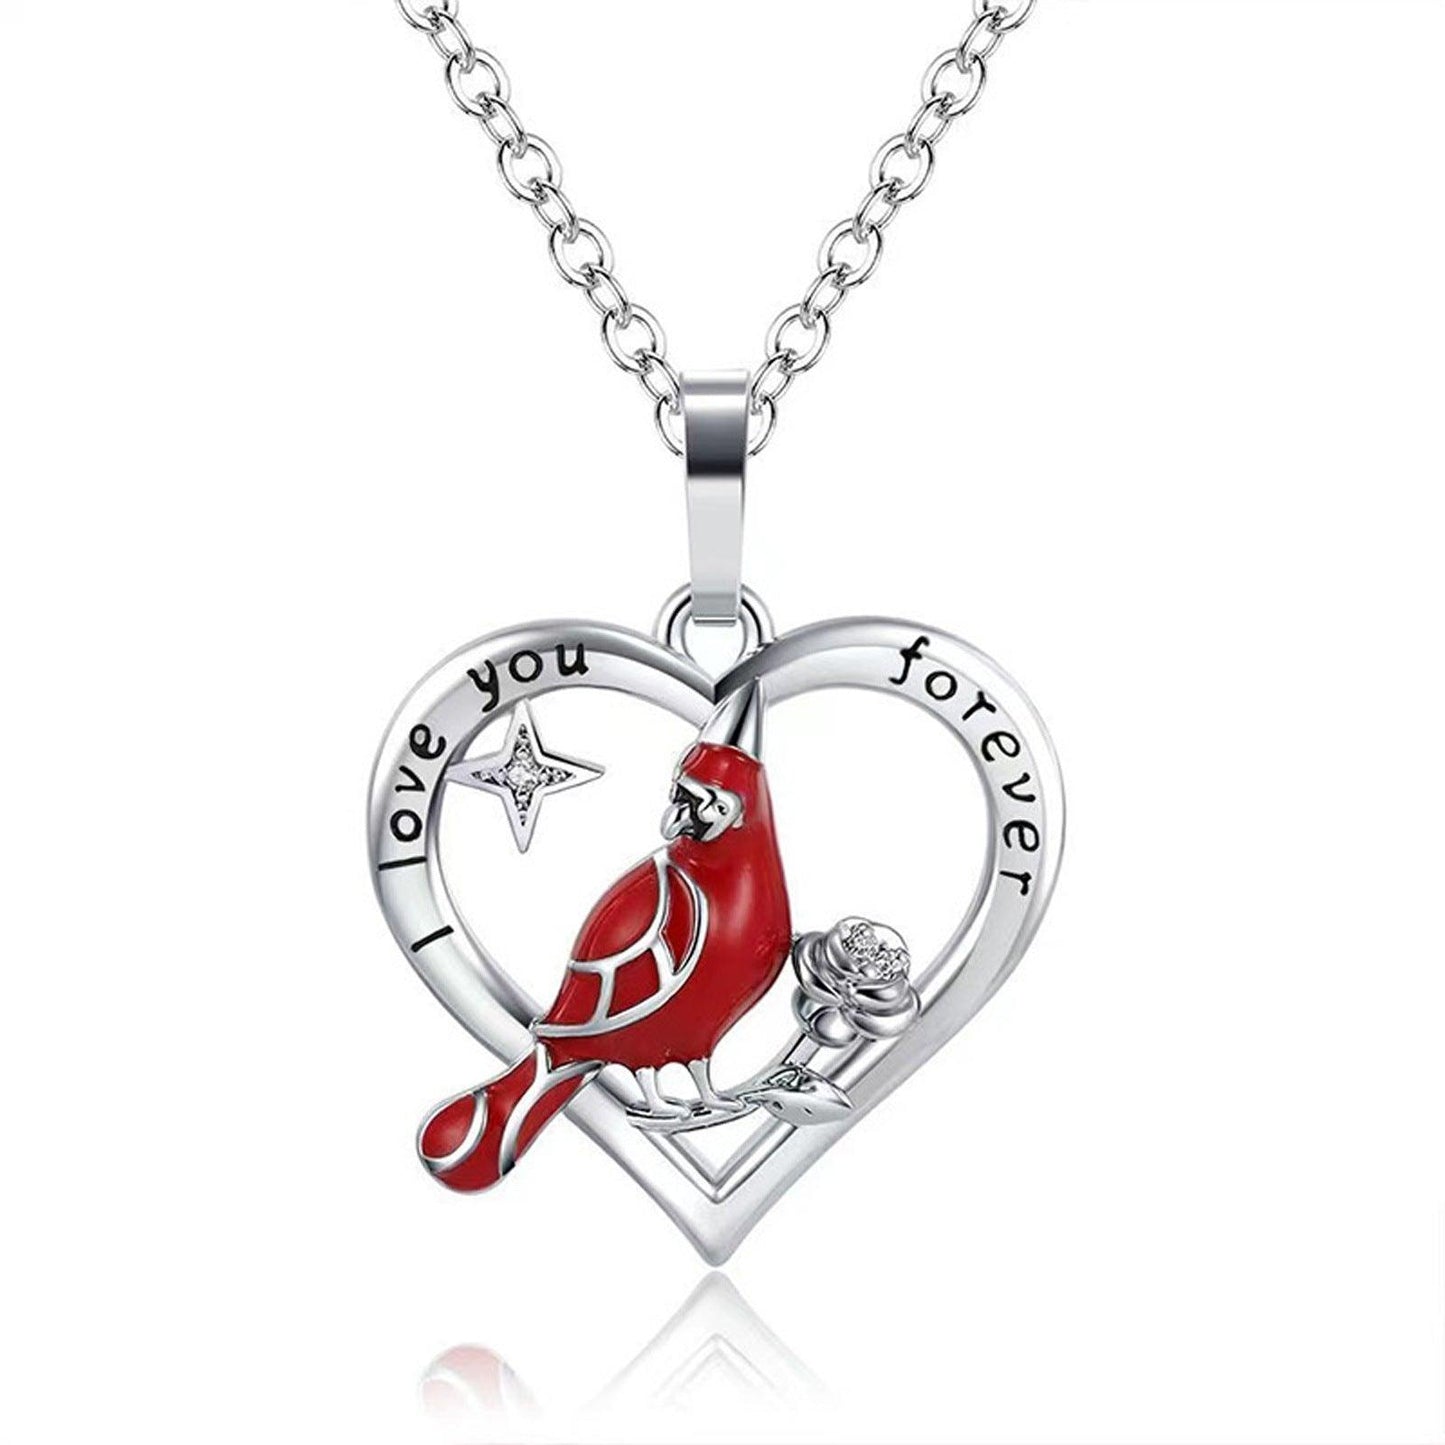 Cardinal Heart Pendant Necklace - ForVanity Valentine’s Day, Valentine’s Day Love Jewelry, women's jewellery & watches Silver Necklace